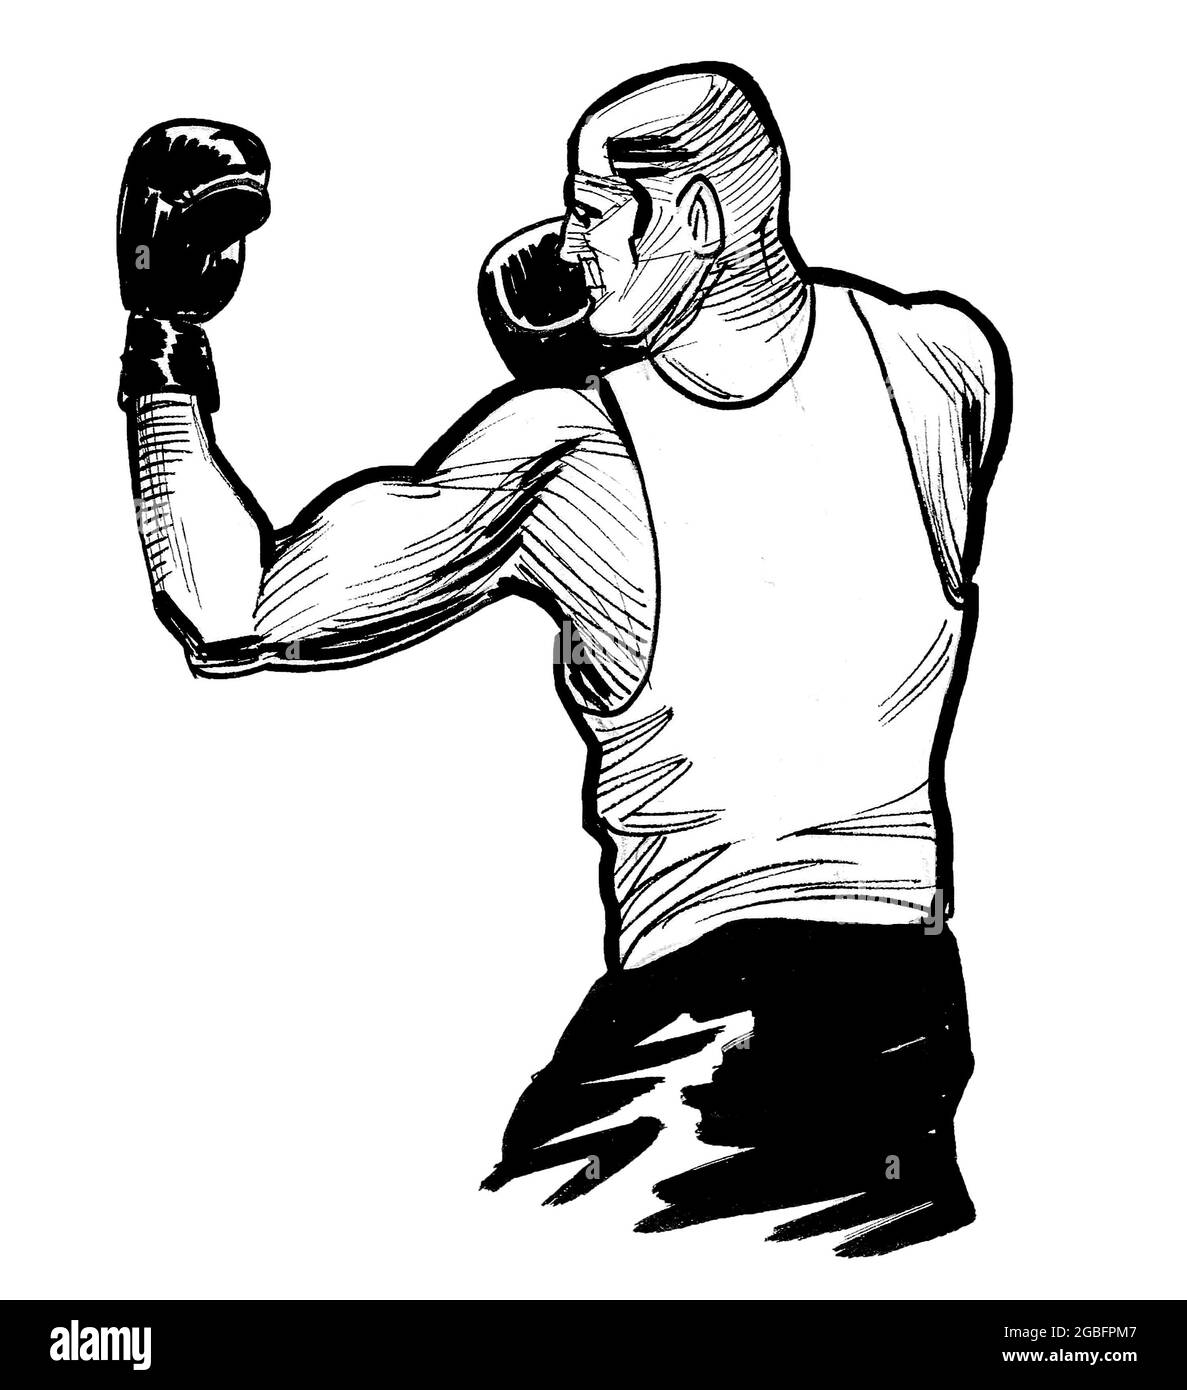 Strong boxing athlete. Ink black and white drawing Stock Photo